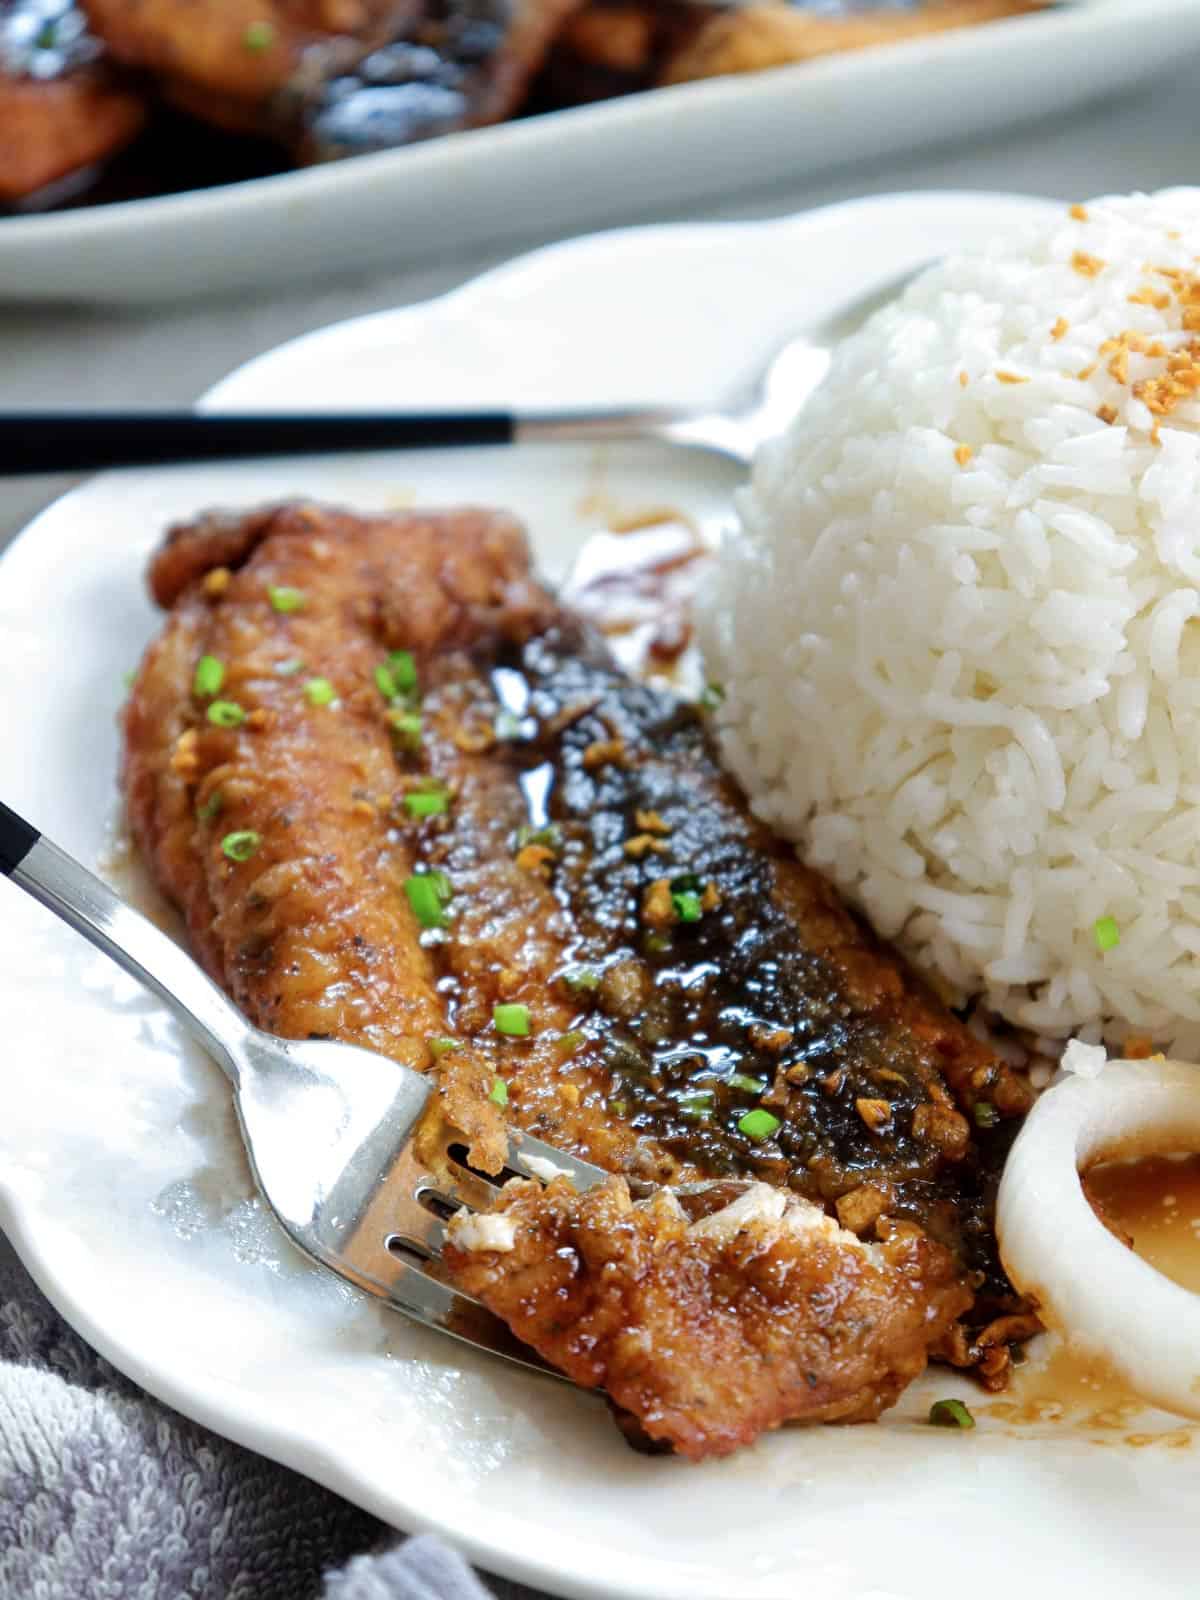 milkfish cooked a la pobre on a white plate with steamed rice